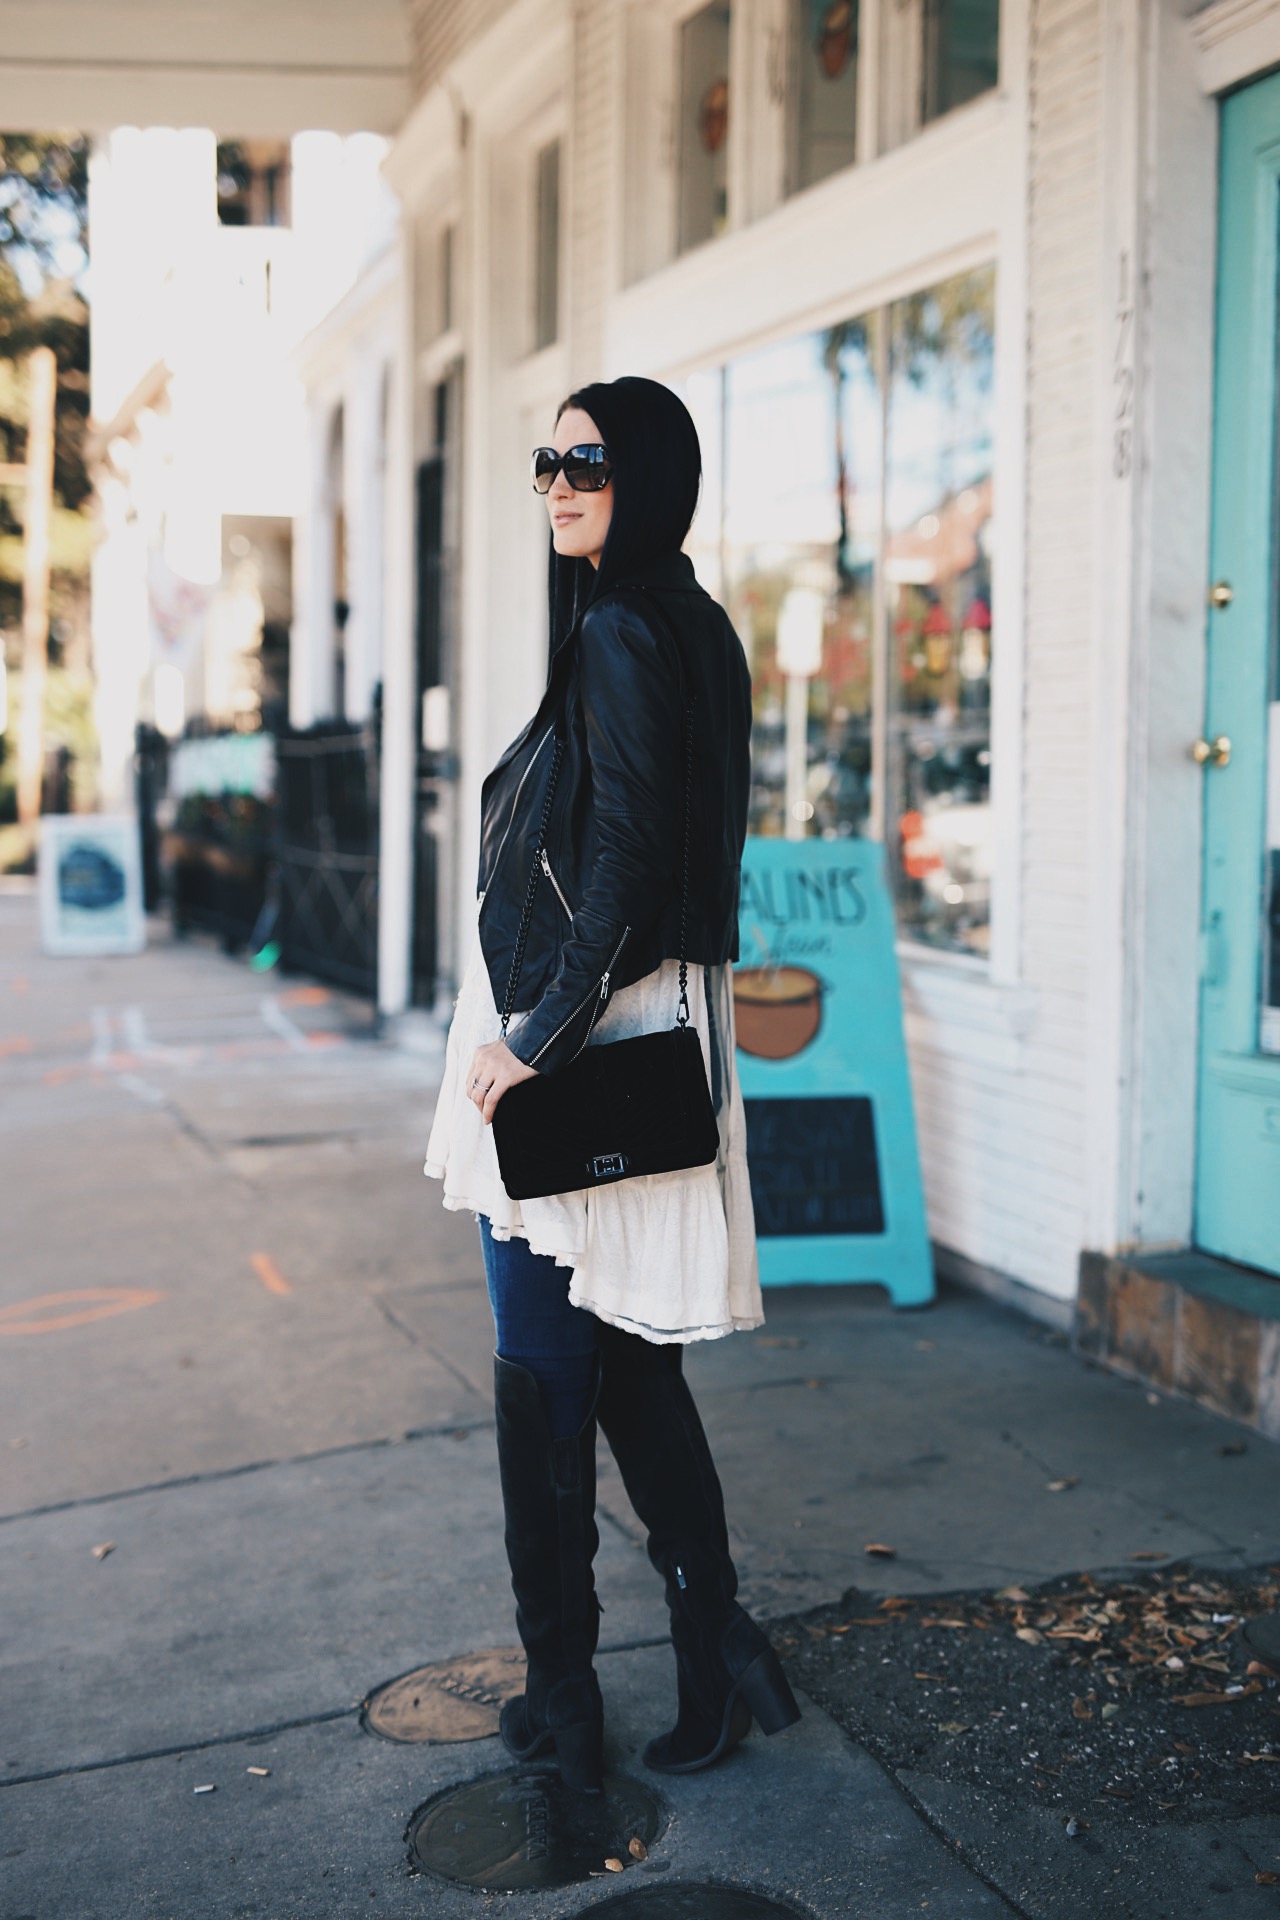 DTKAustin is sharing her favorite white free people top shot while in New Orleans. Ashley is carrying a Rebecca Minkoff Love bag and wearing Vince Camuto OTK Boots. Click to get more info and pics!